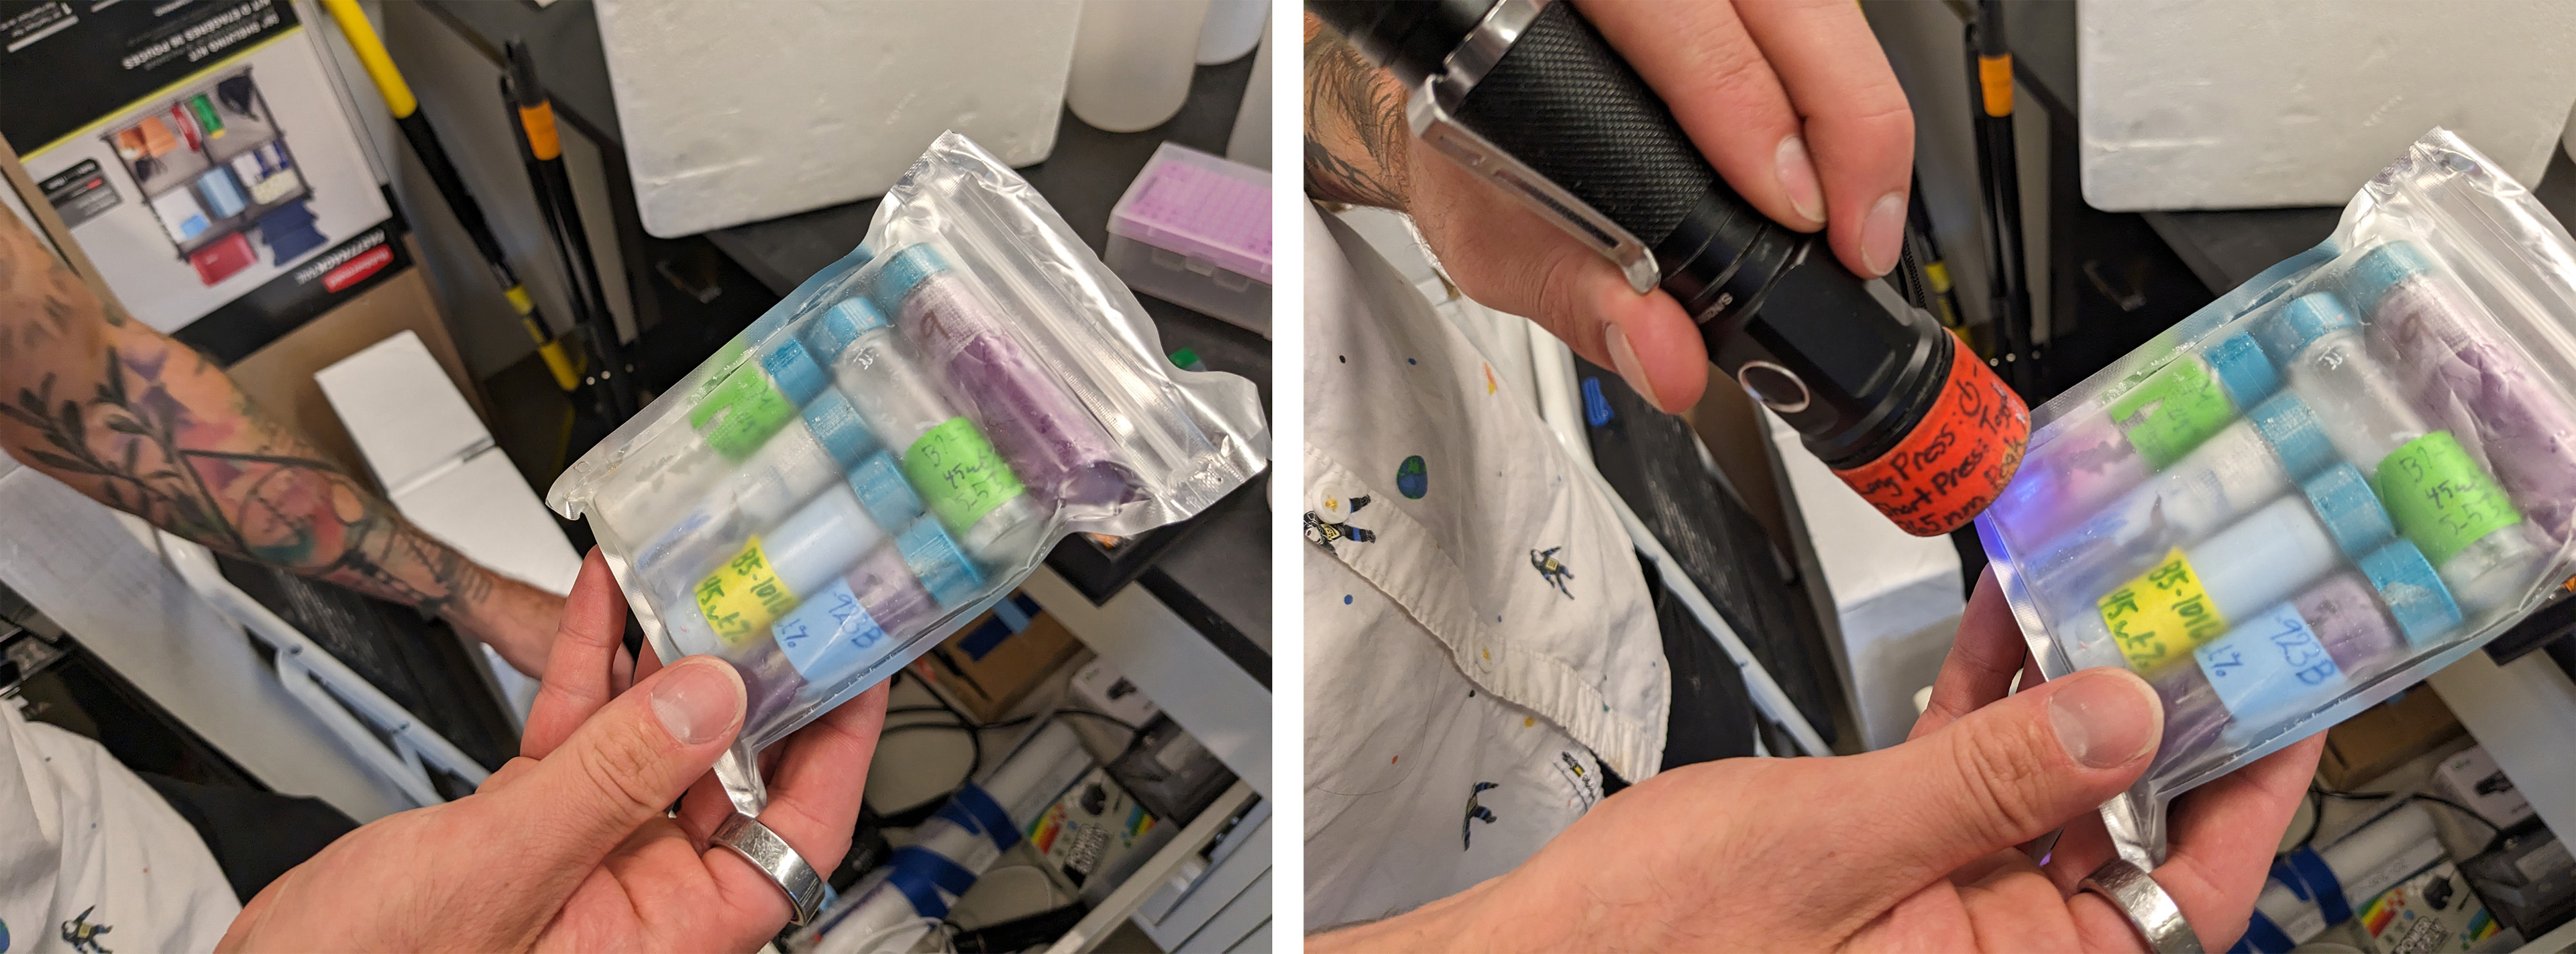 Two photos side-by-side: on the left are vials of tattoo inks; on the right are a the same vials changing colors after a UV light is shone on them.